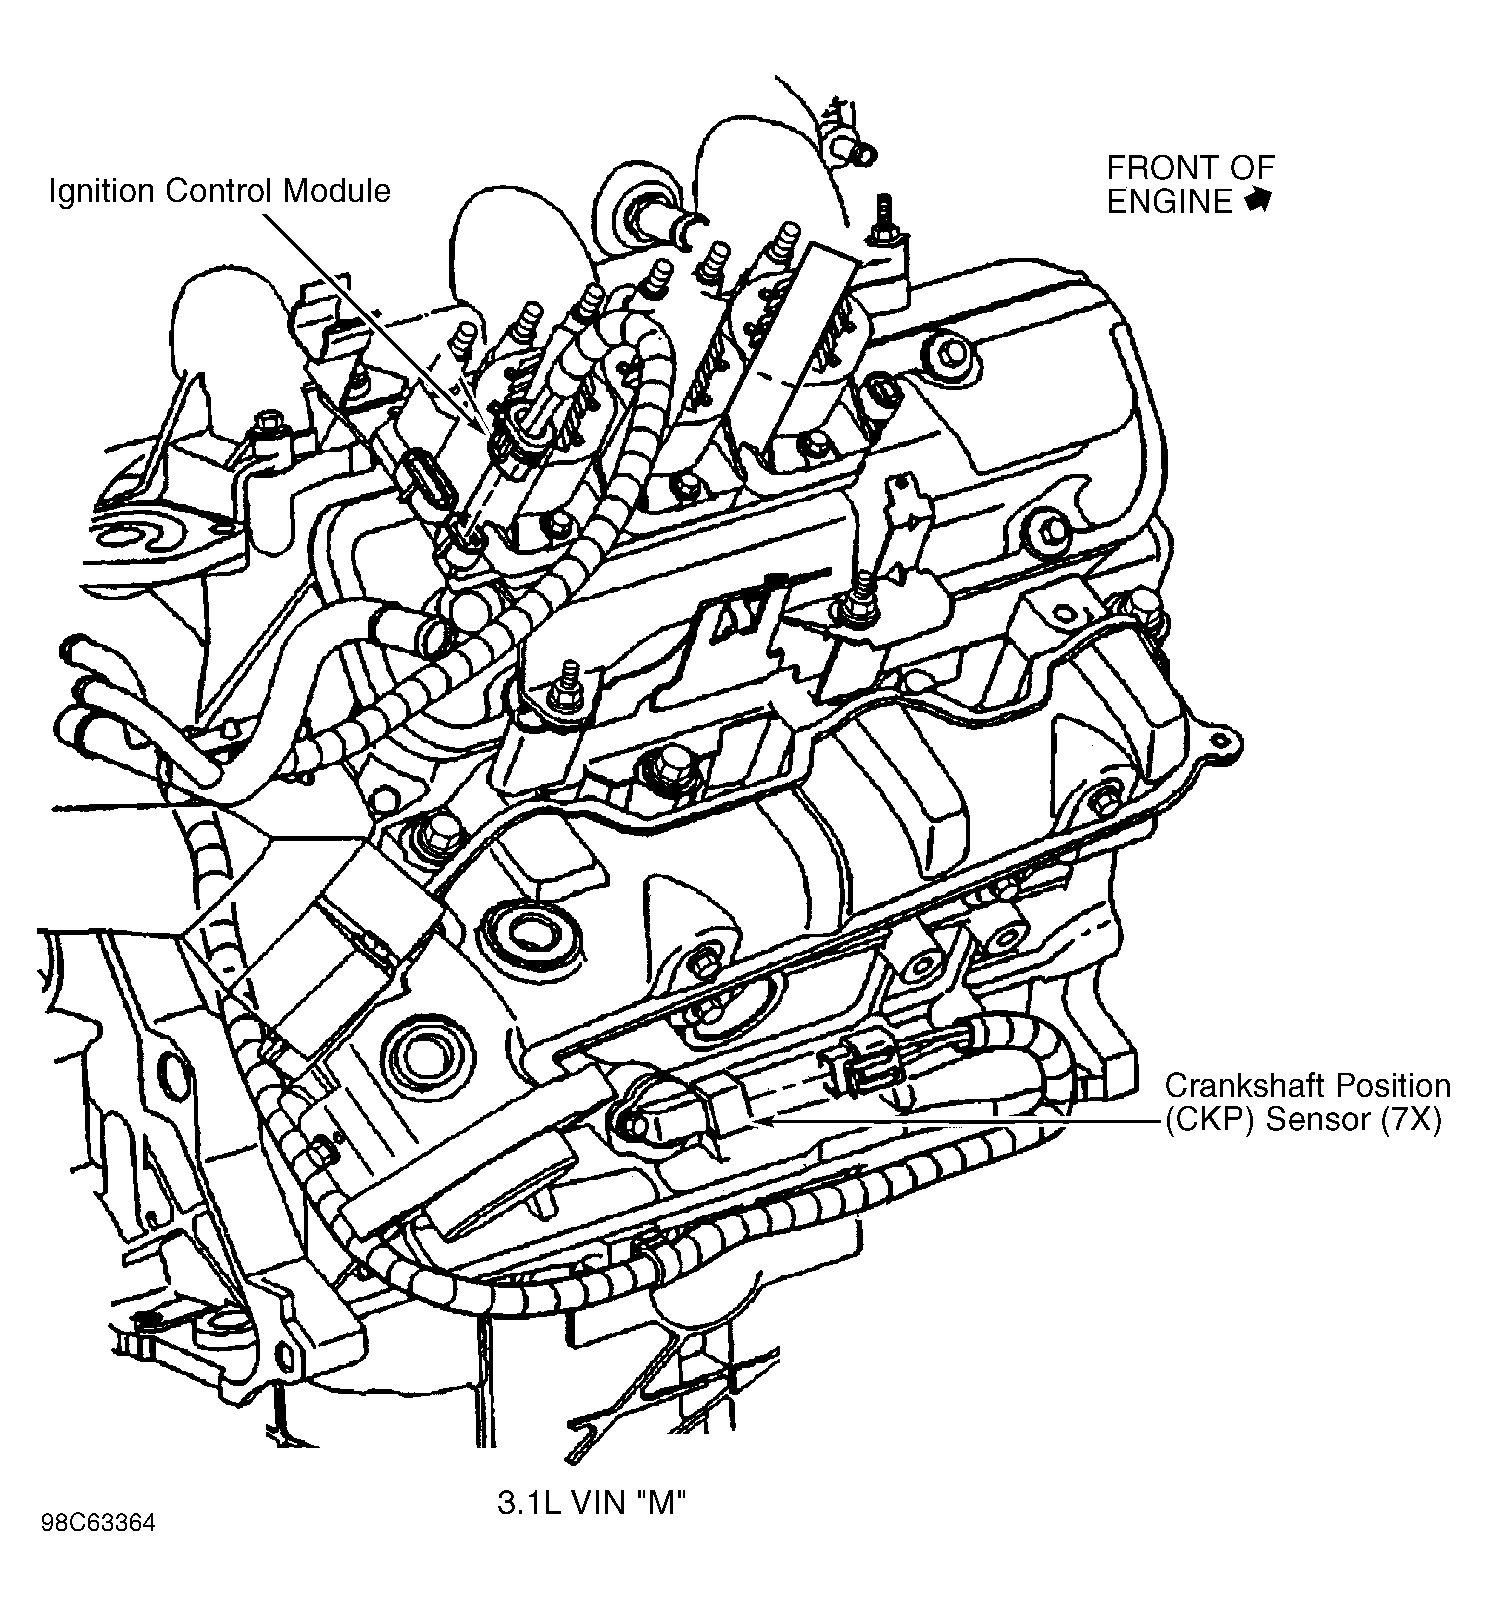 Chevrolet Lumina LS 1999 - Component Locations -  Right Side Of Engine (3.1L VIN M)